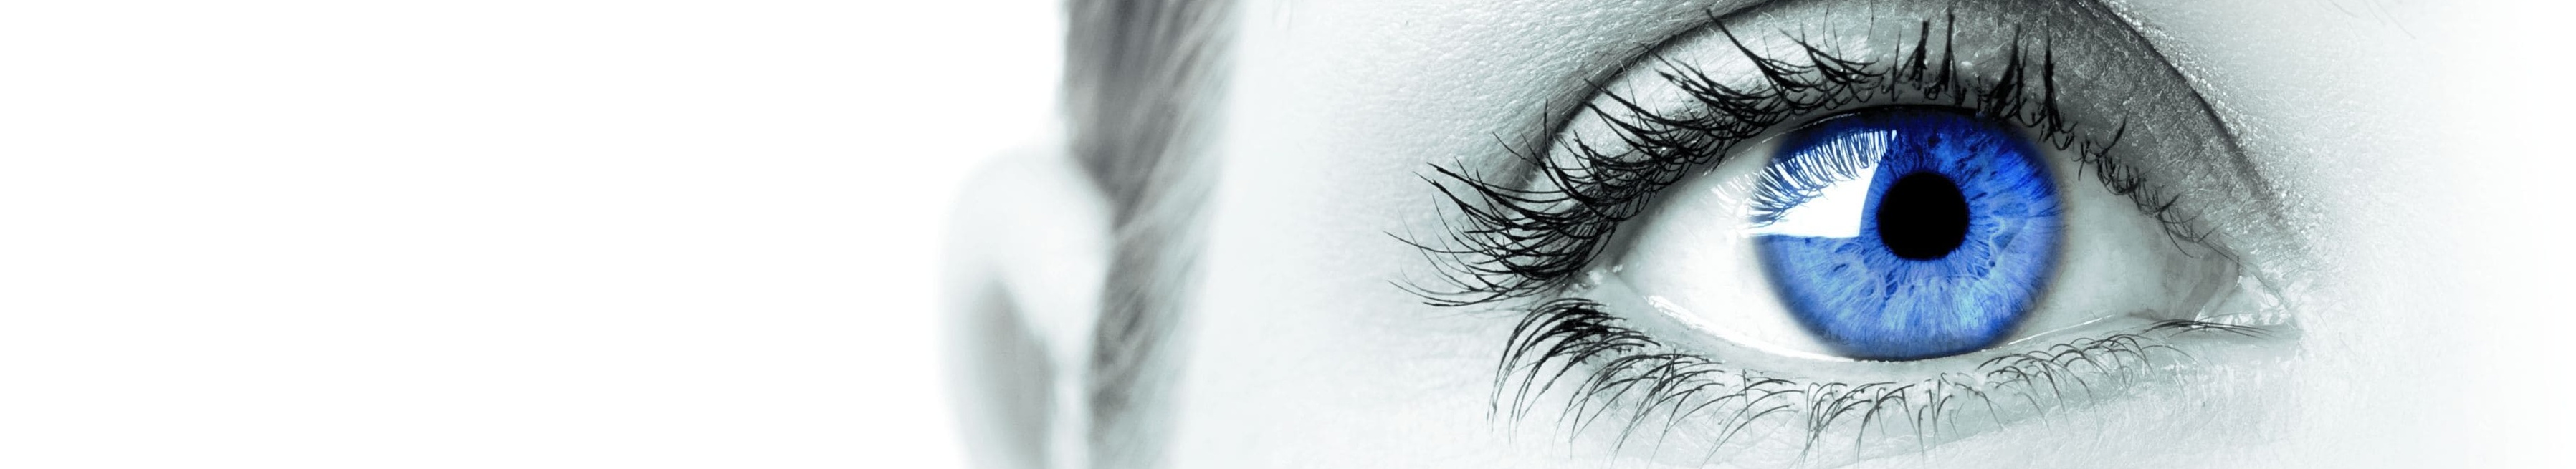 Header graphic for diagnostic eye products category. A woman’s blue eye.